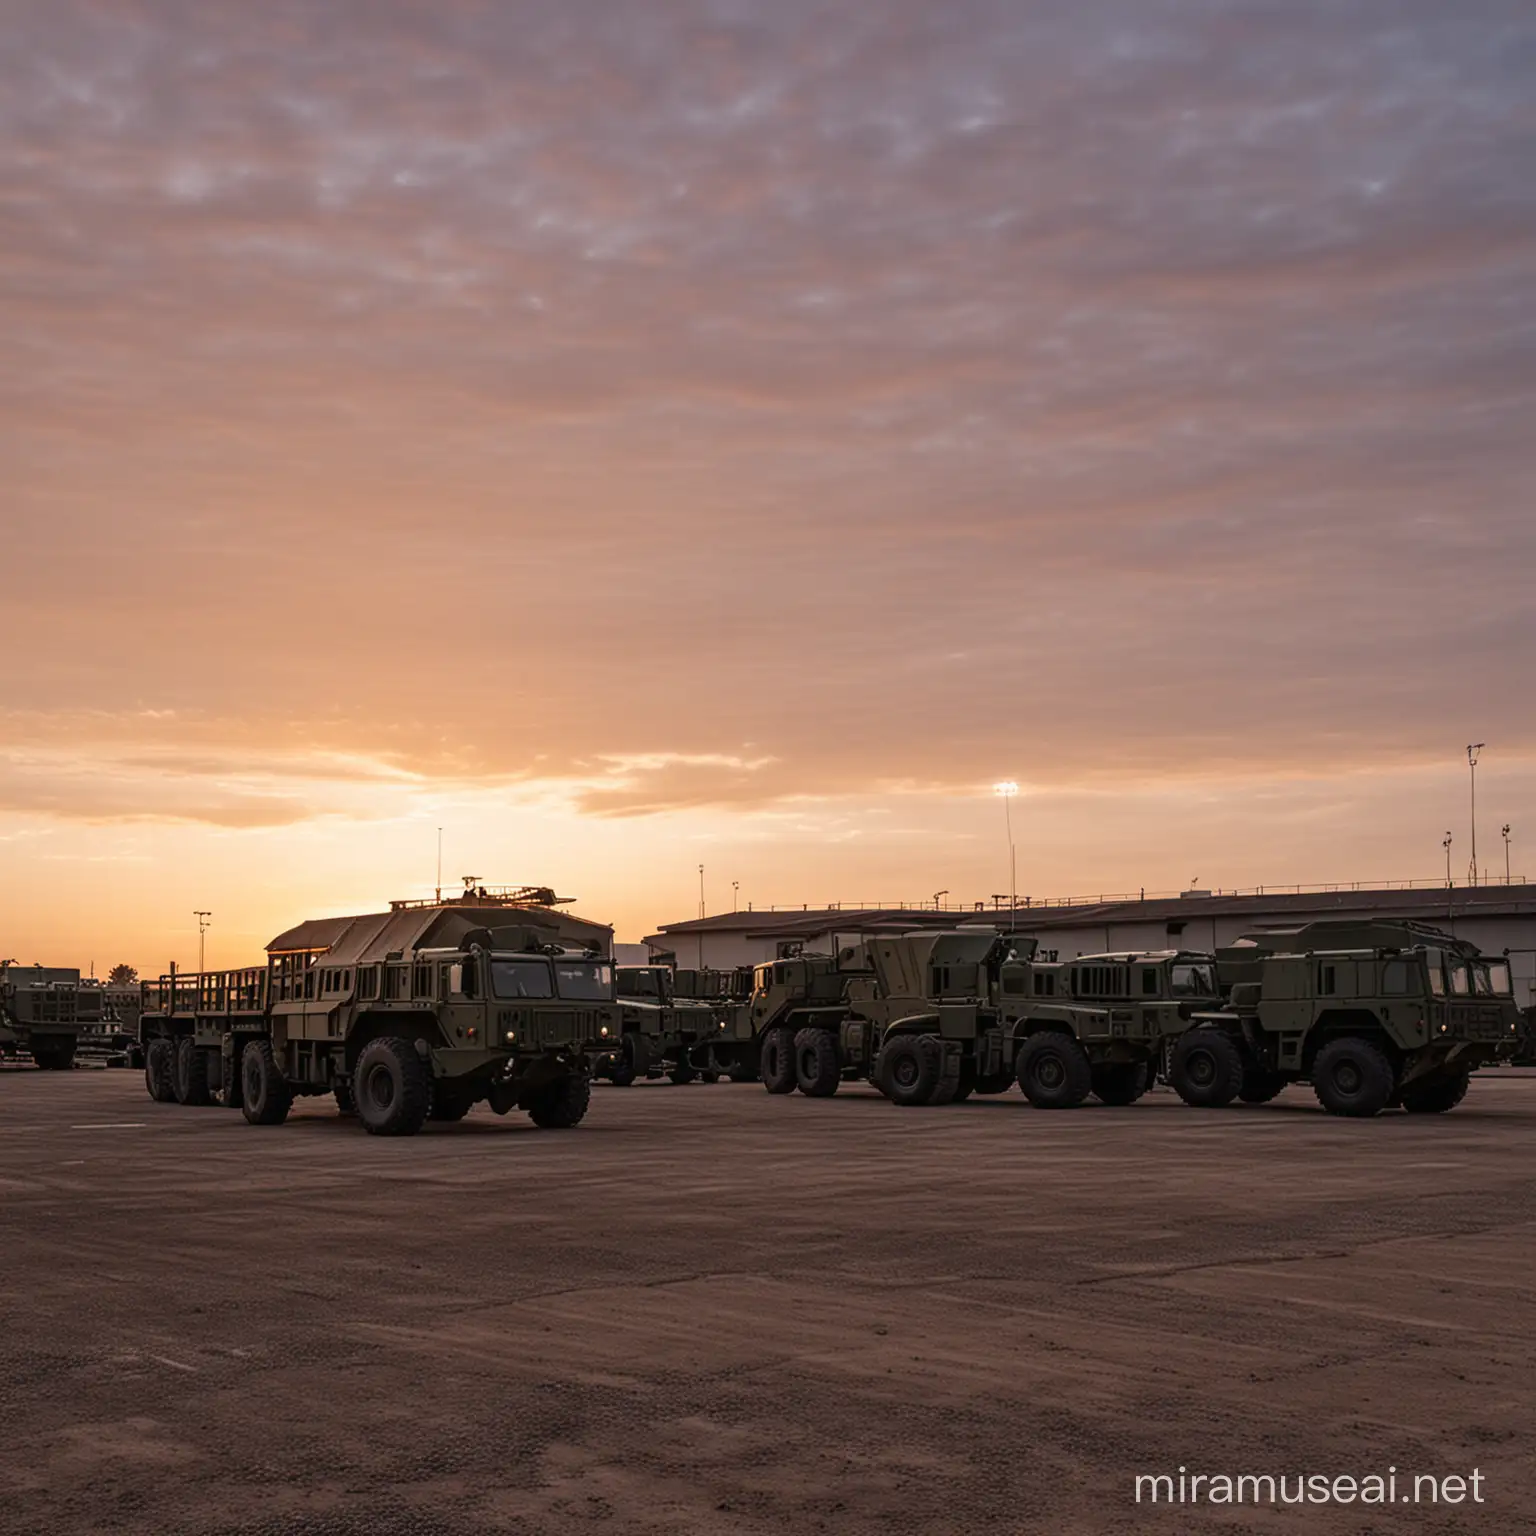 military equipment at a military base installation; dusk ambience.